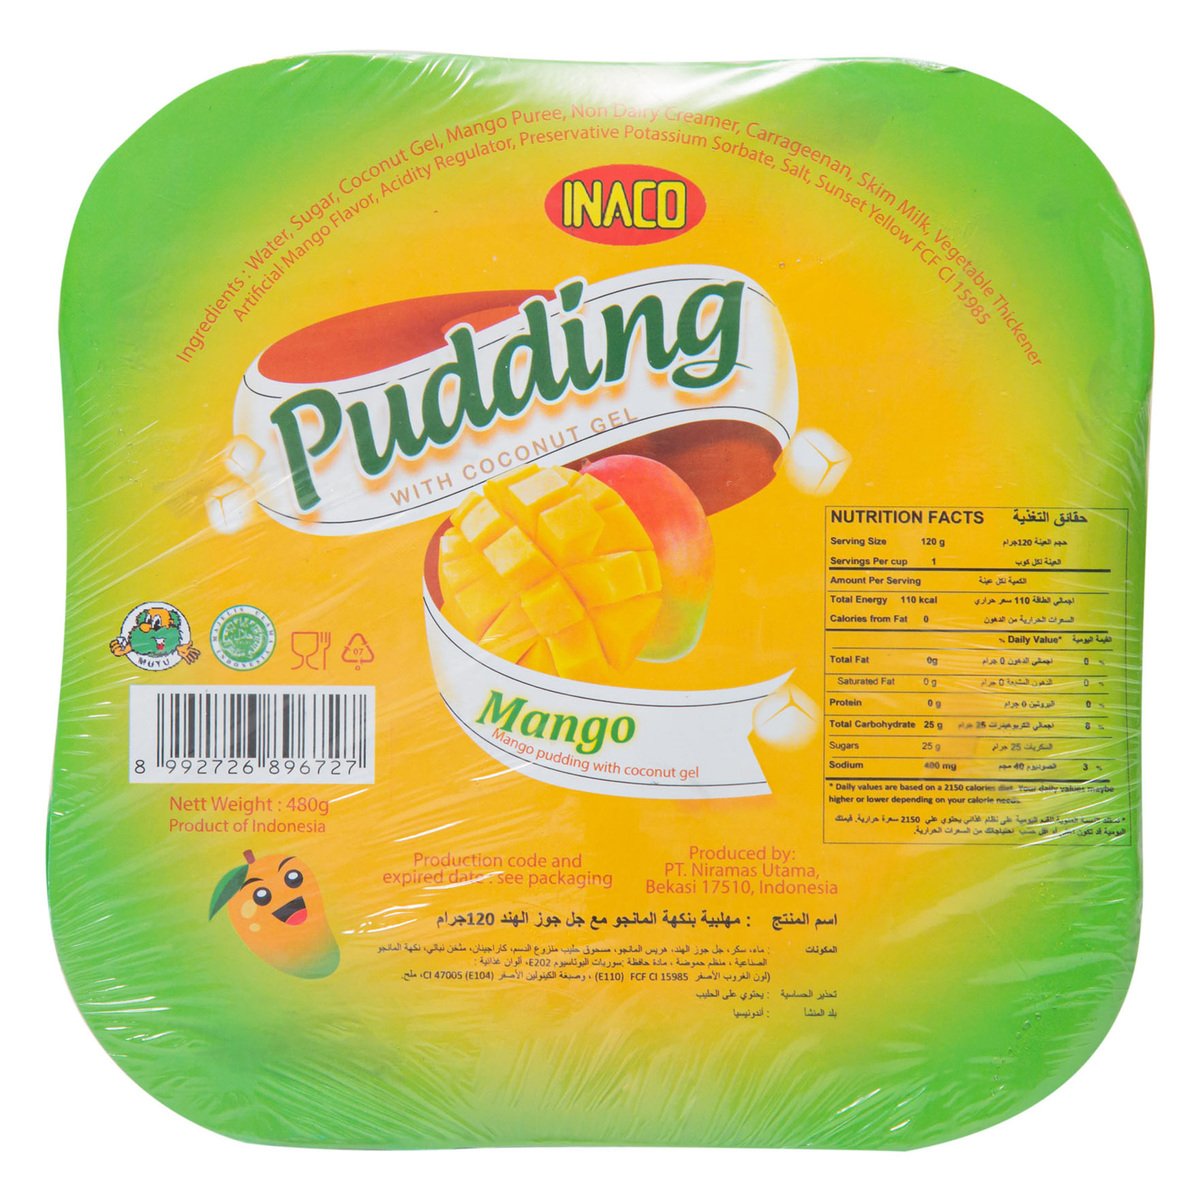 Inaco Pudding With Coconut Gel Mango 480 g